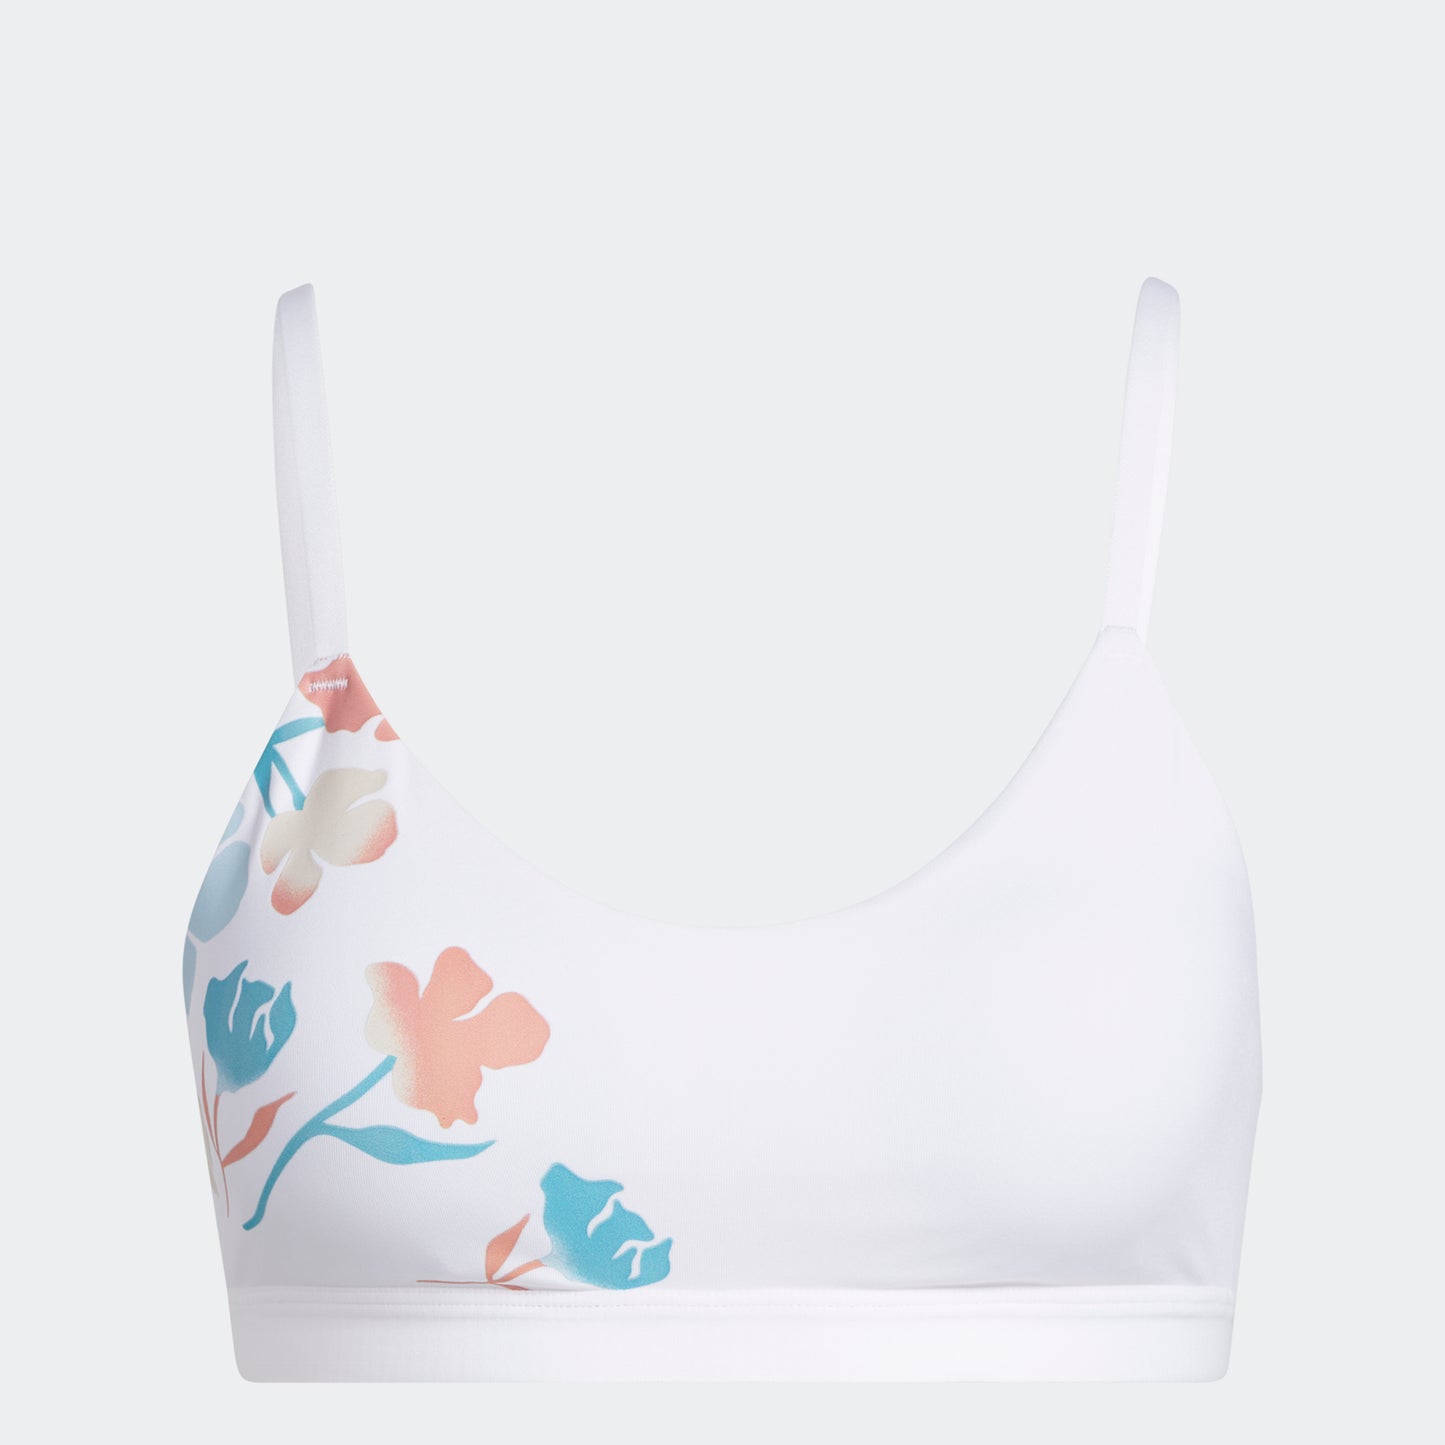 adidas FLORAL GFX Low Support Sports Bra | White | Women's